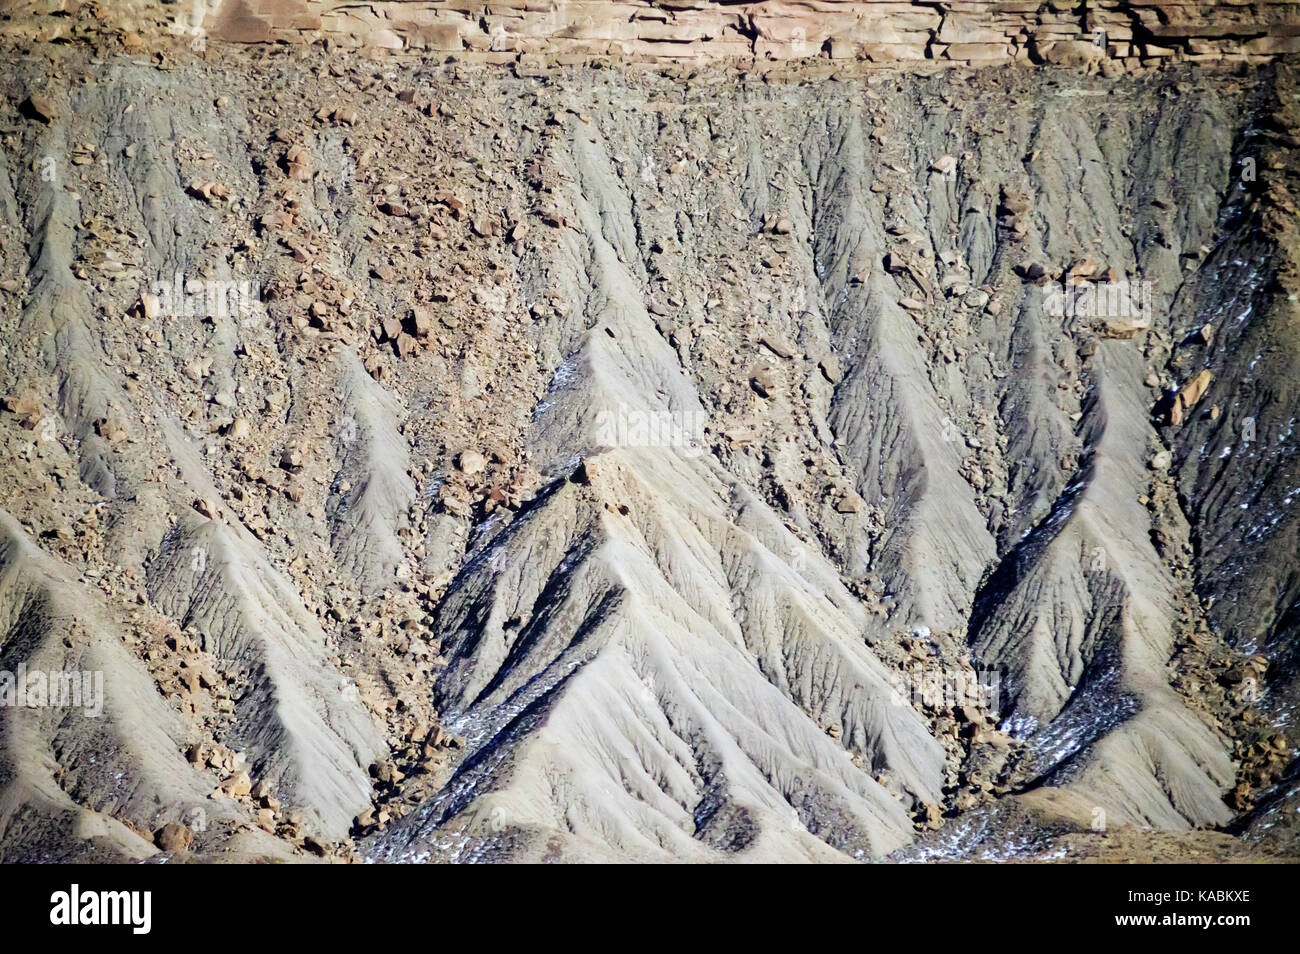 The side of rocky mountain on a bright blue sky with channels carved into it. Stock Photo